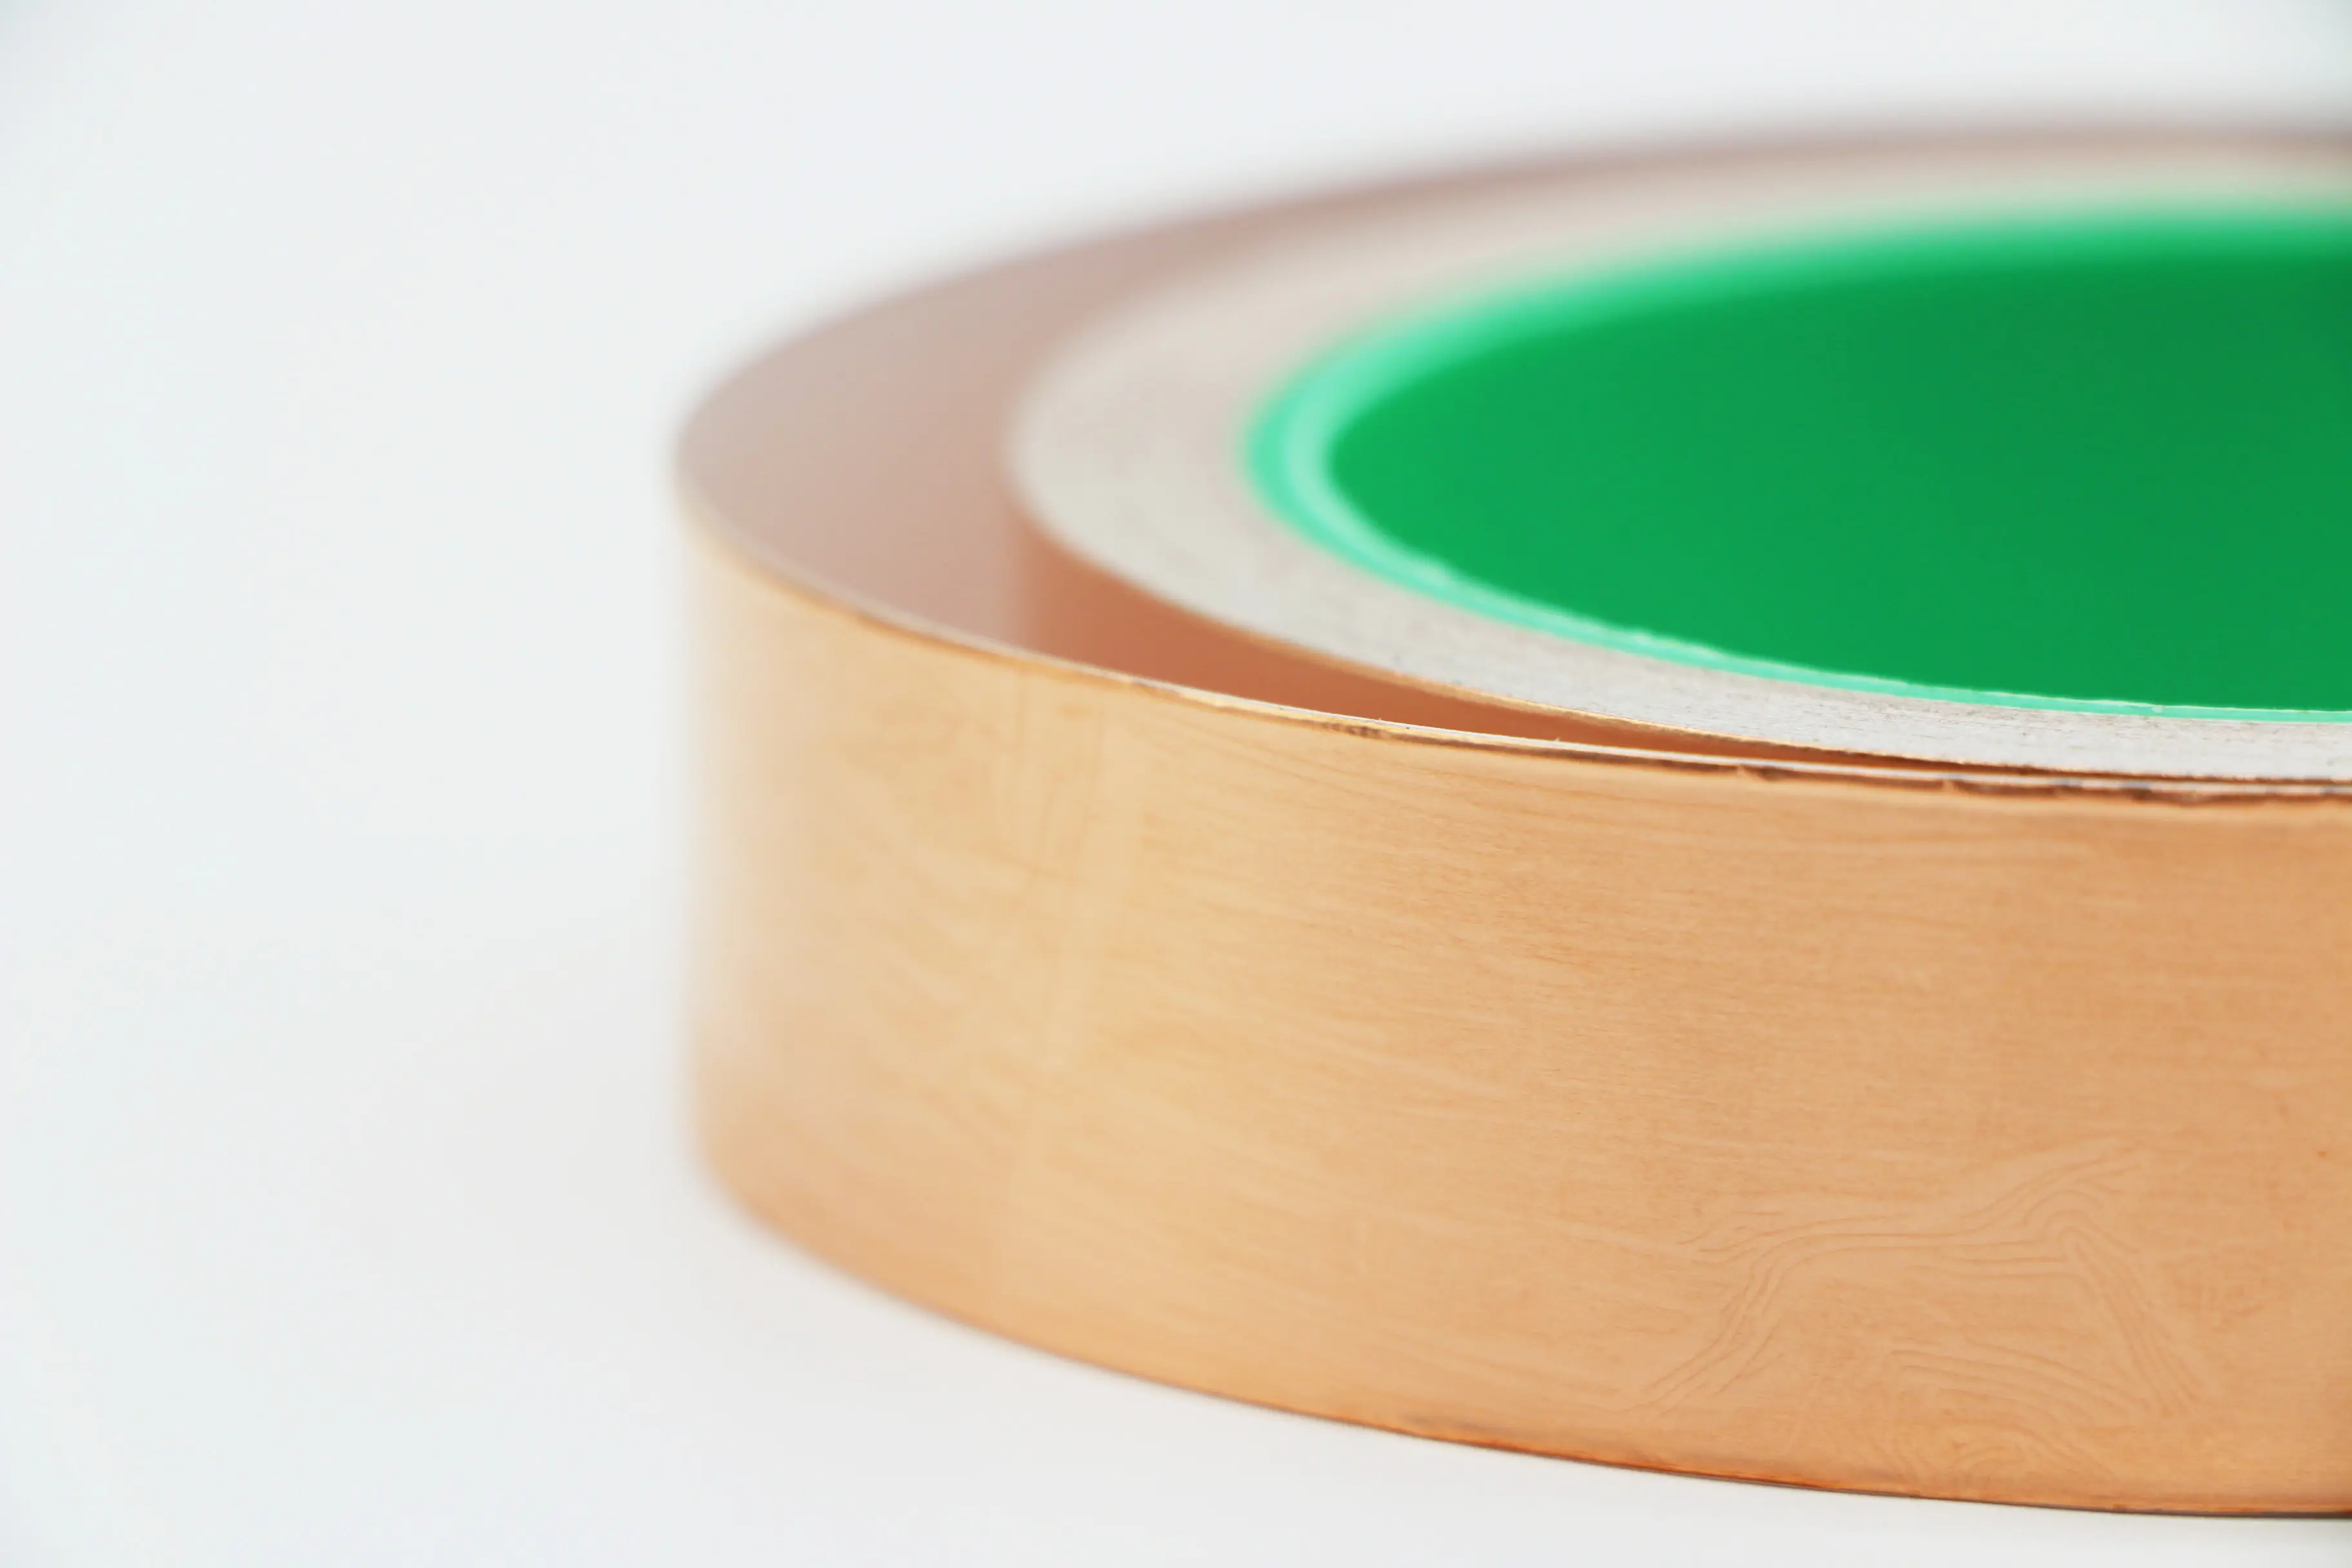 Electric Guitar Shielding Copper Tape Manufacturers and Suppliers China -  Factory Price - Naikos(Xiamen) Adhesive Tape Co., Ltd